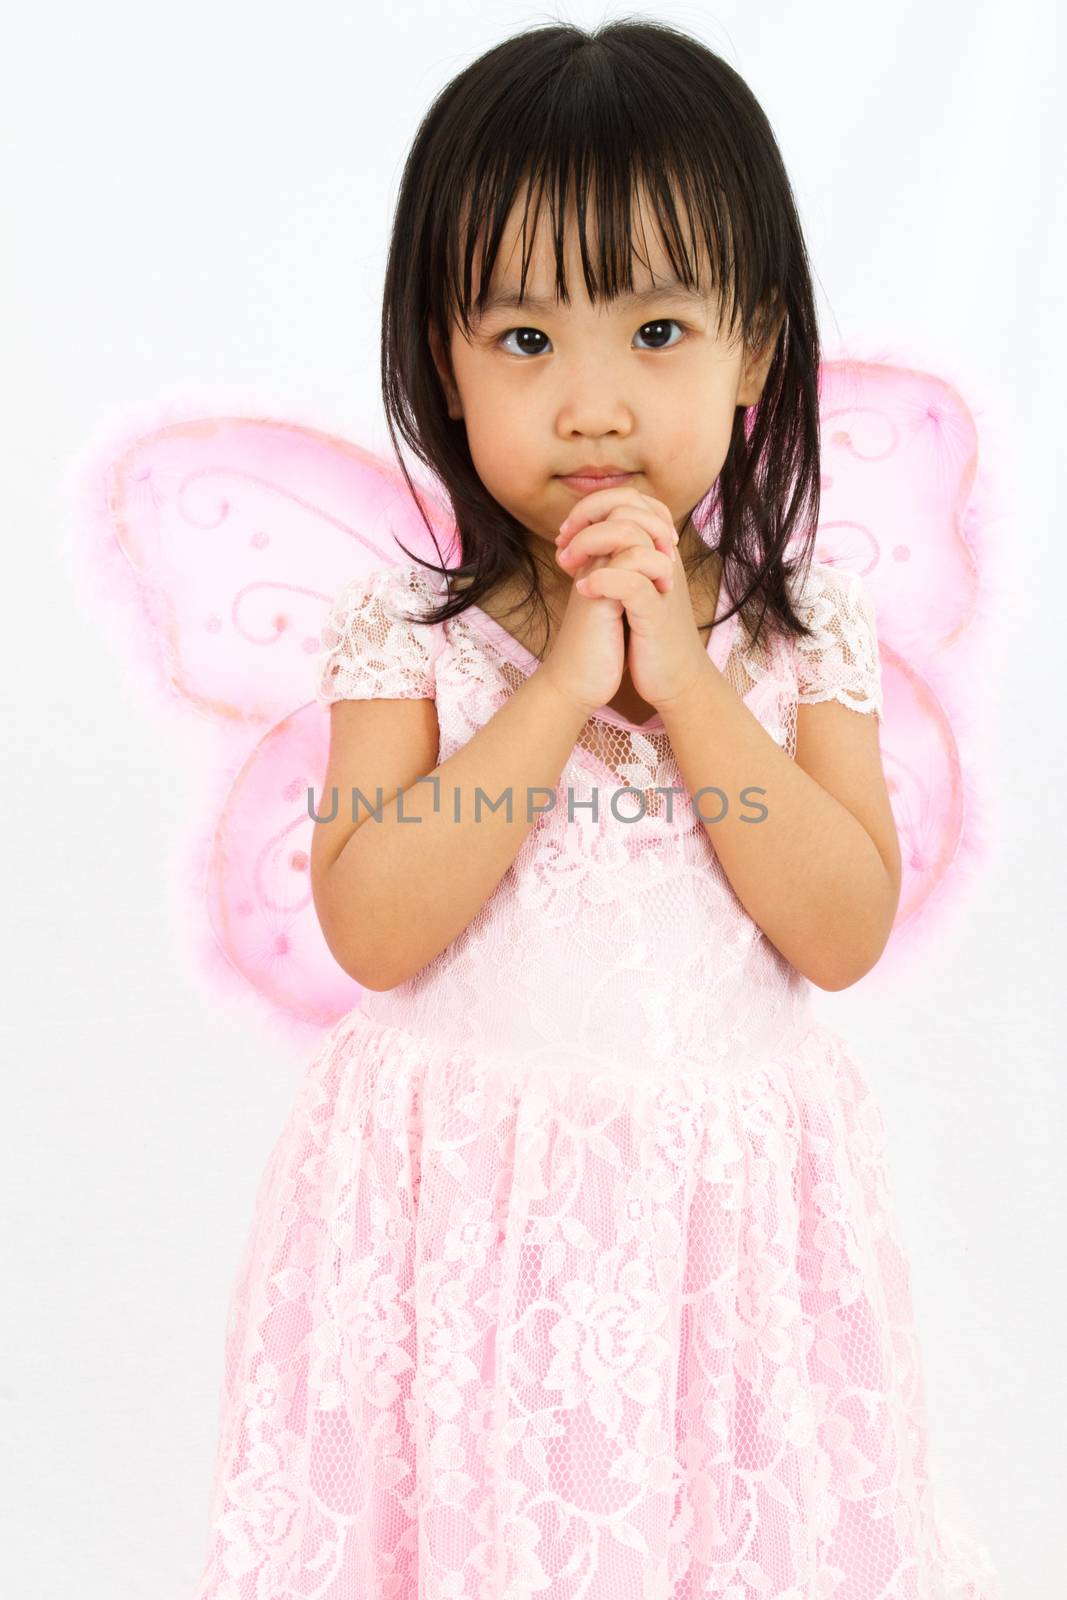 Chinese little girl wearing butterfly custome with praying gestu by kiankhoon